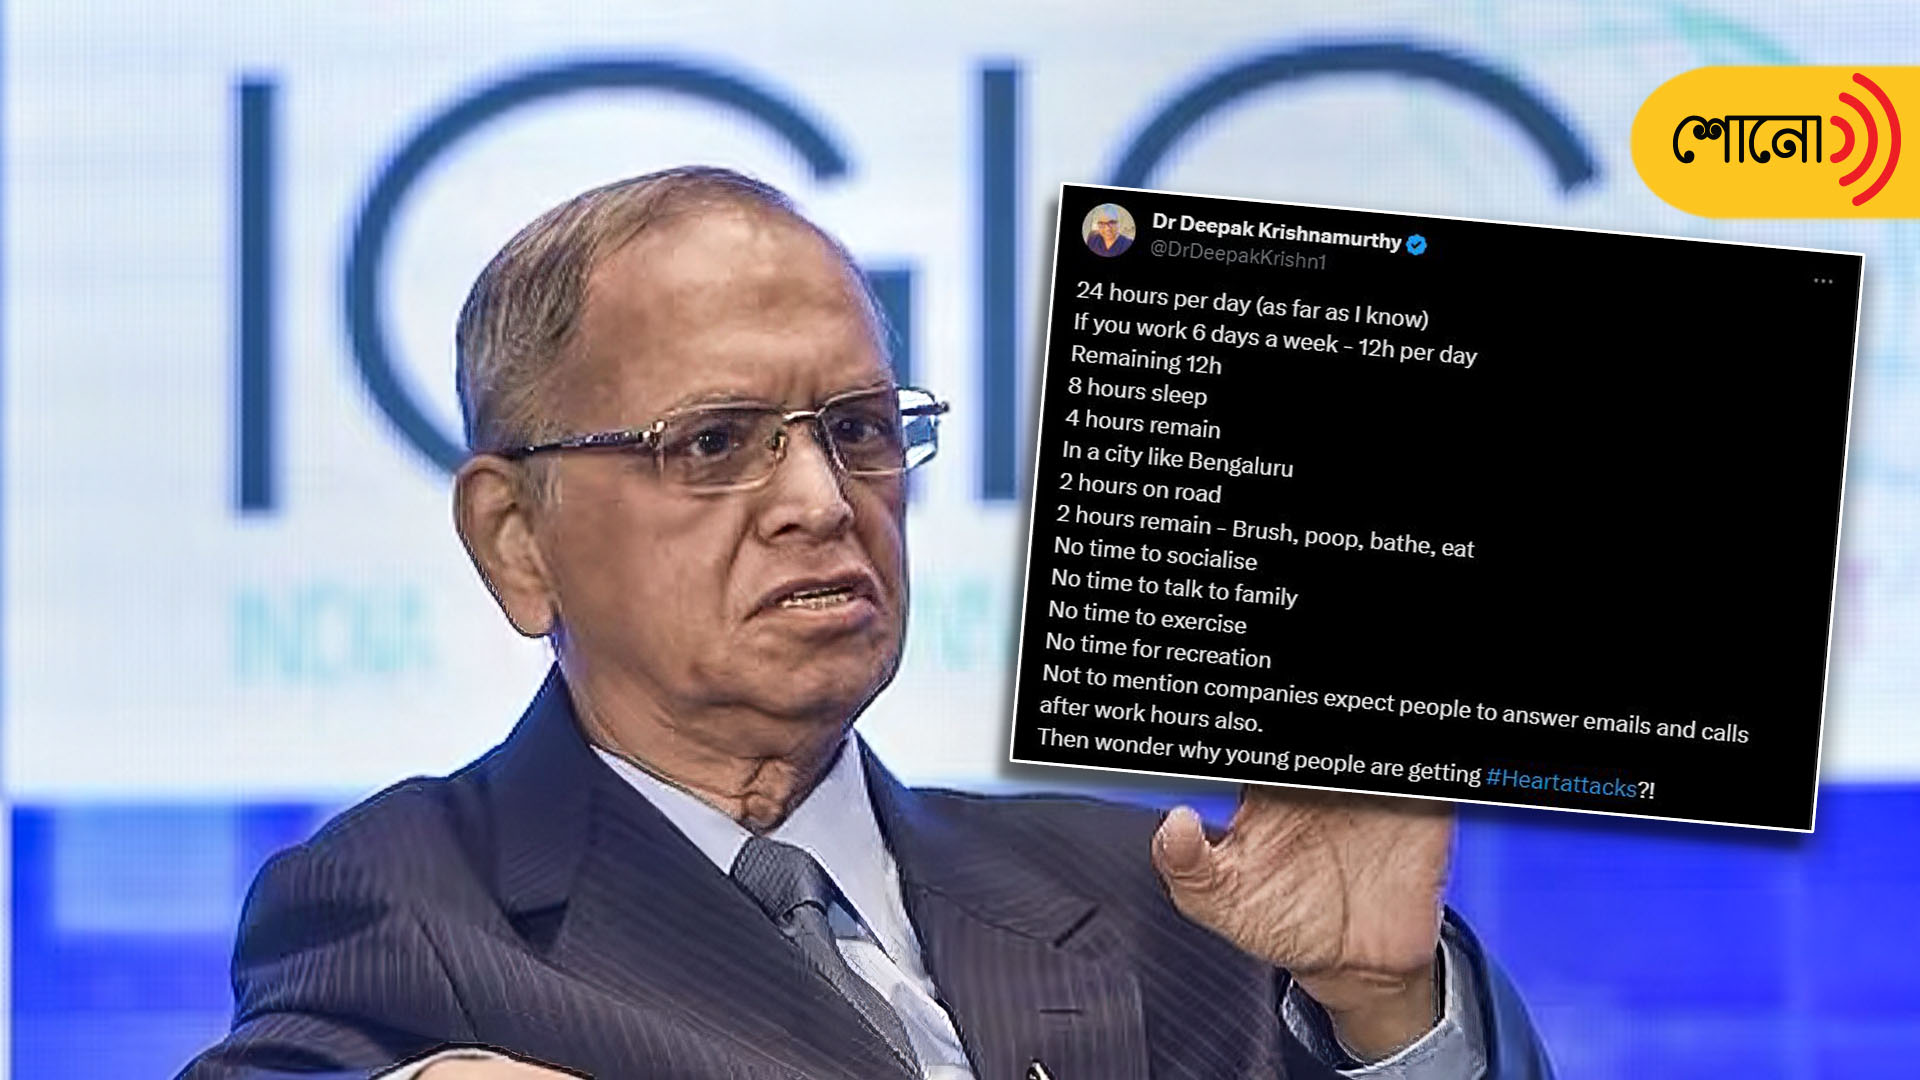 Bengaluru doctor slams Narayana Murthy's on his ‘70-hr work week’ comments